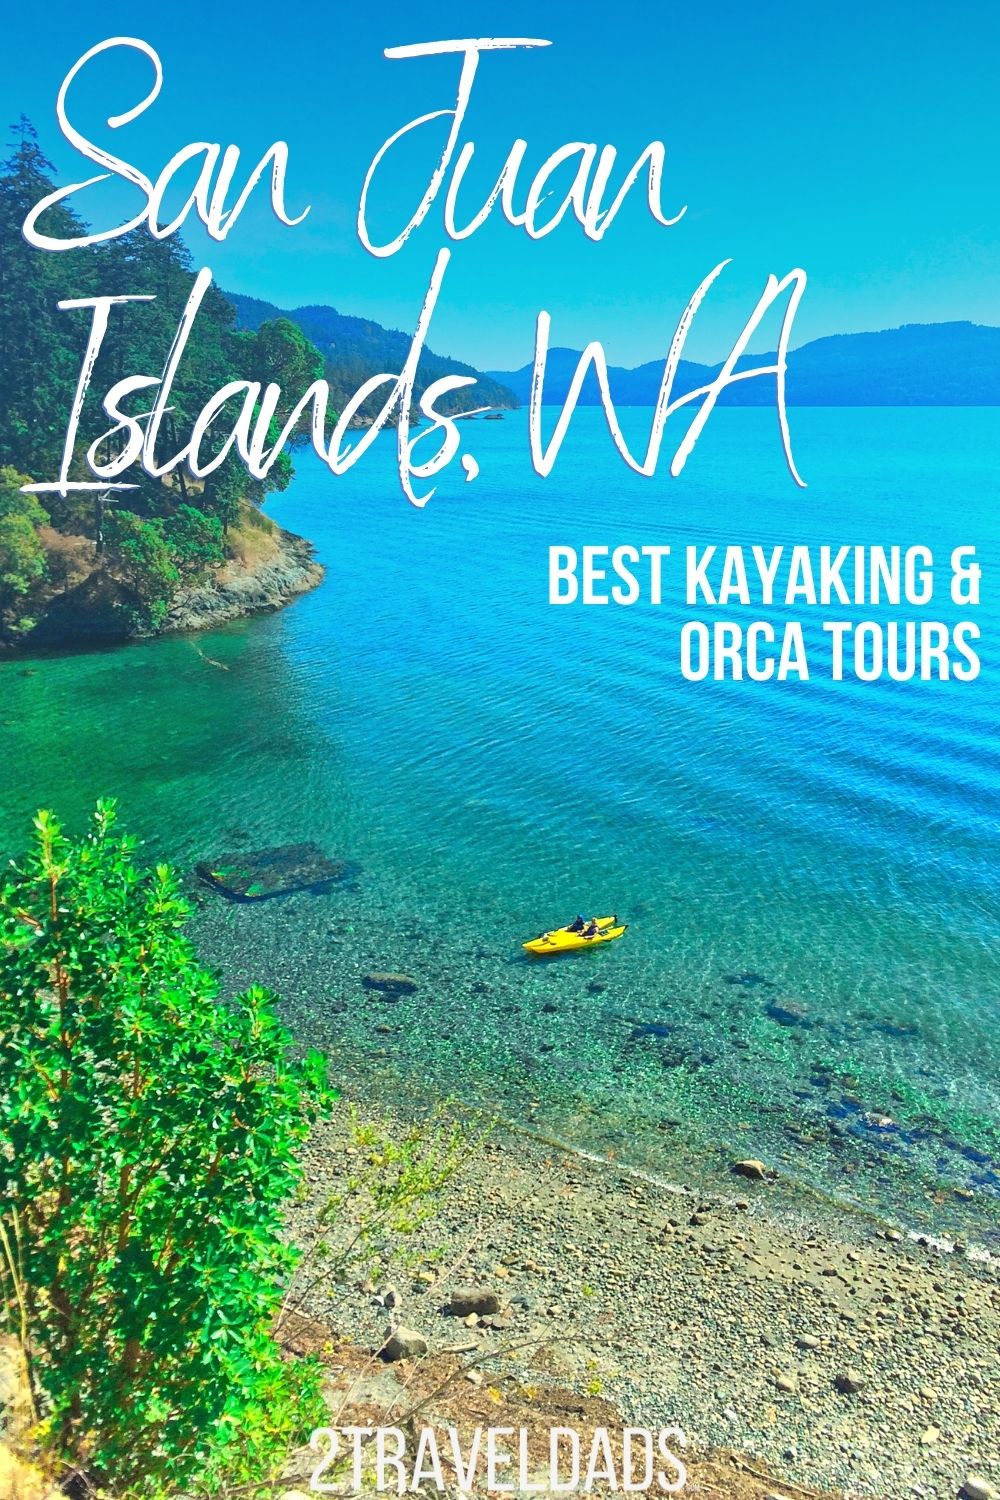 Best kayaking in the San Juan Islands of Washington. Kayak tours and best places to launch in the San Juans, including kayaking with orcas and bioluminescence near Seattle.